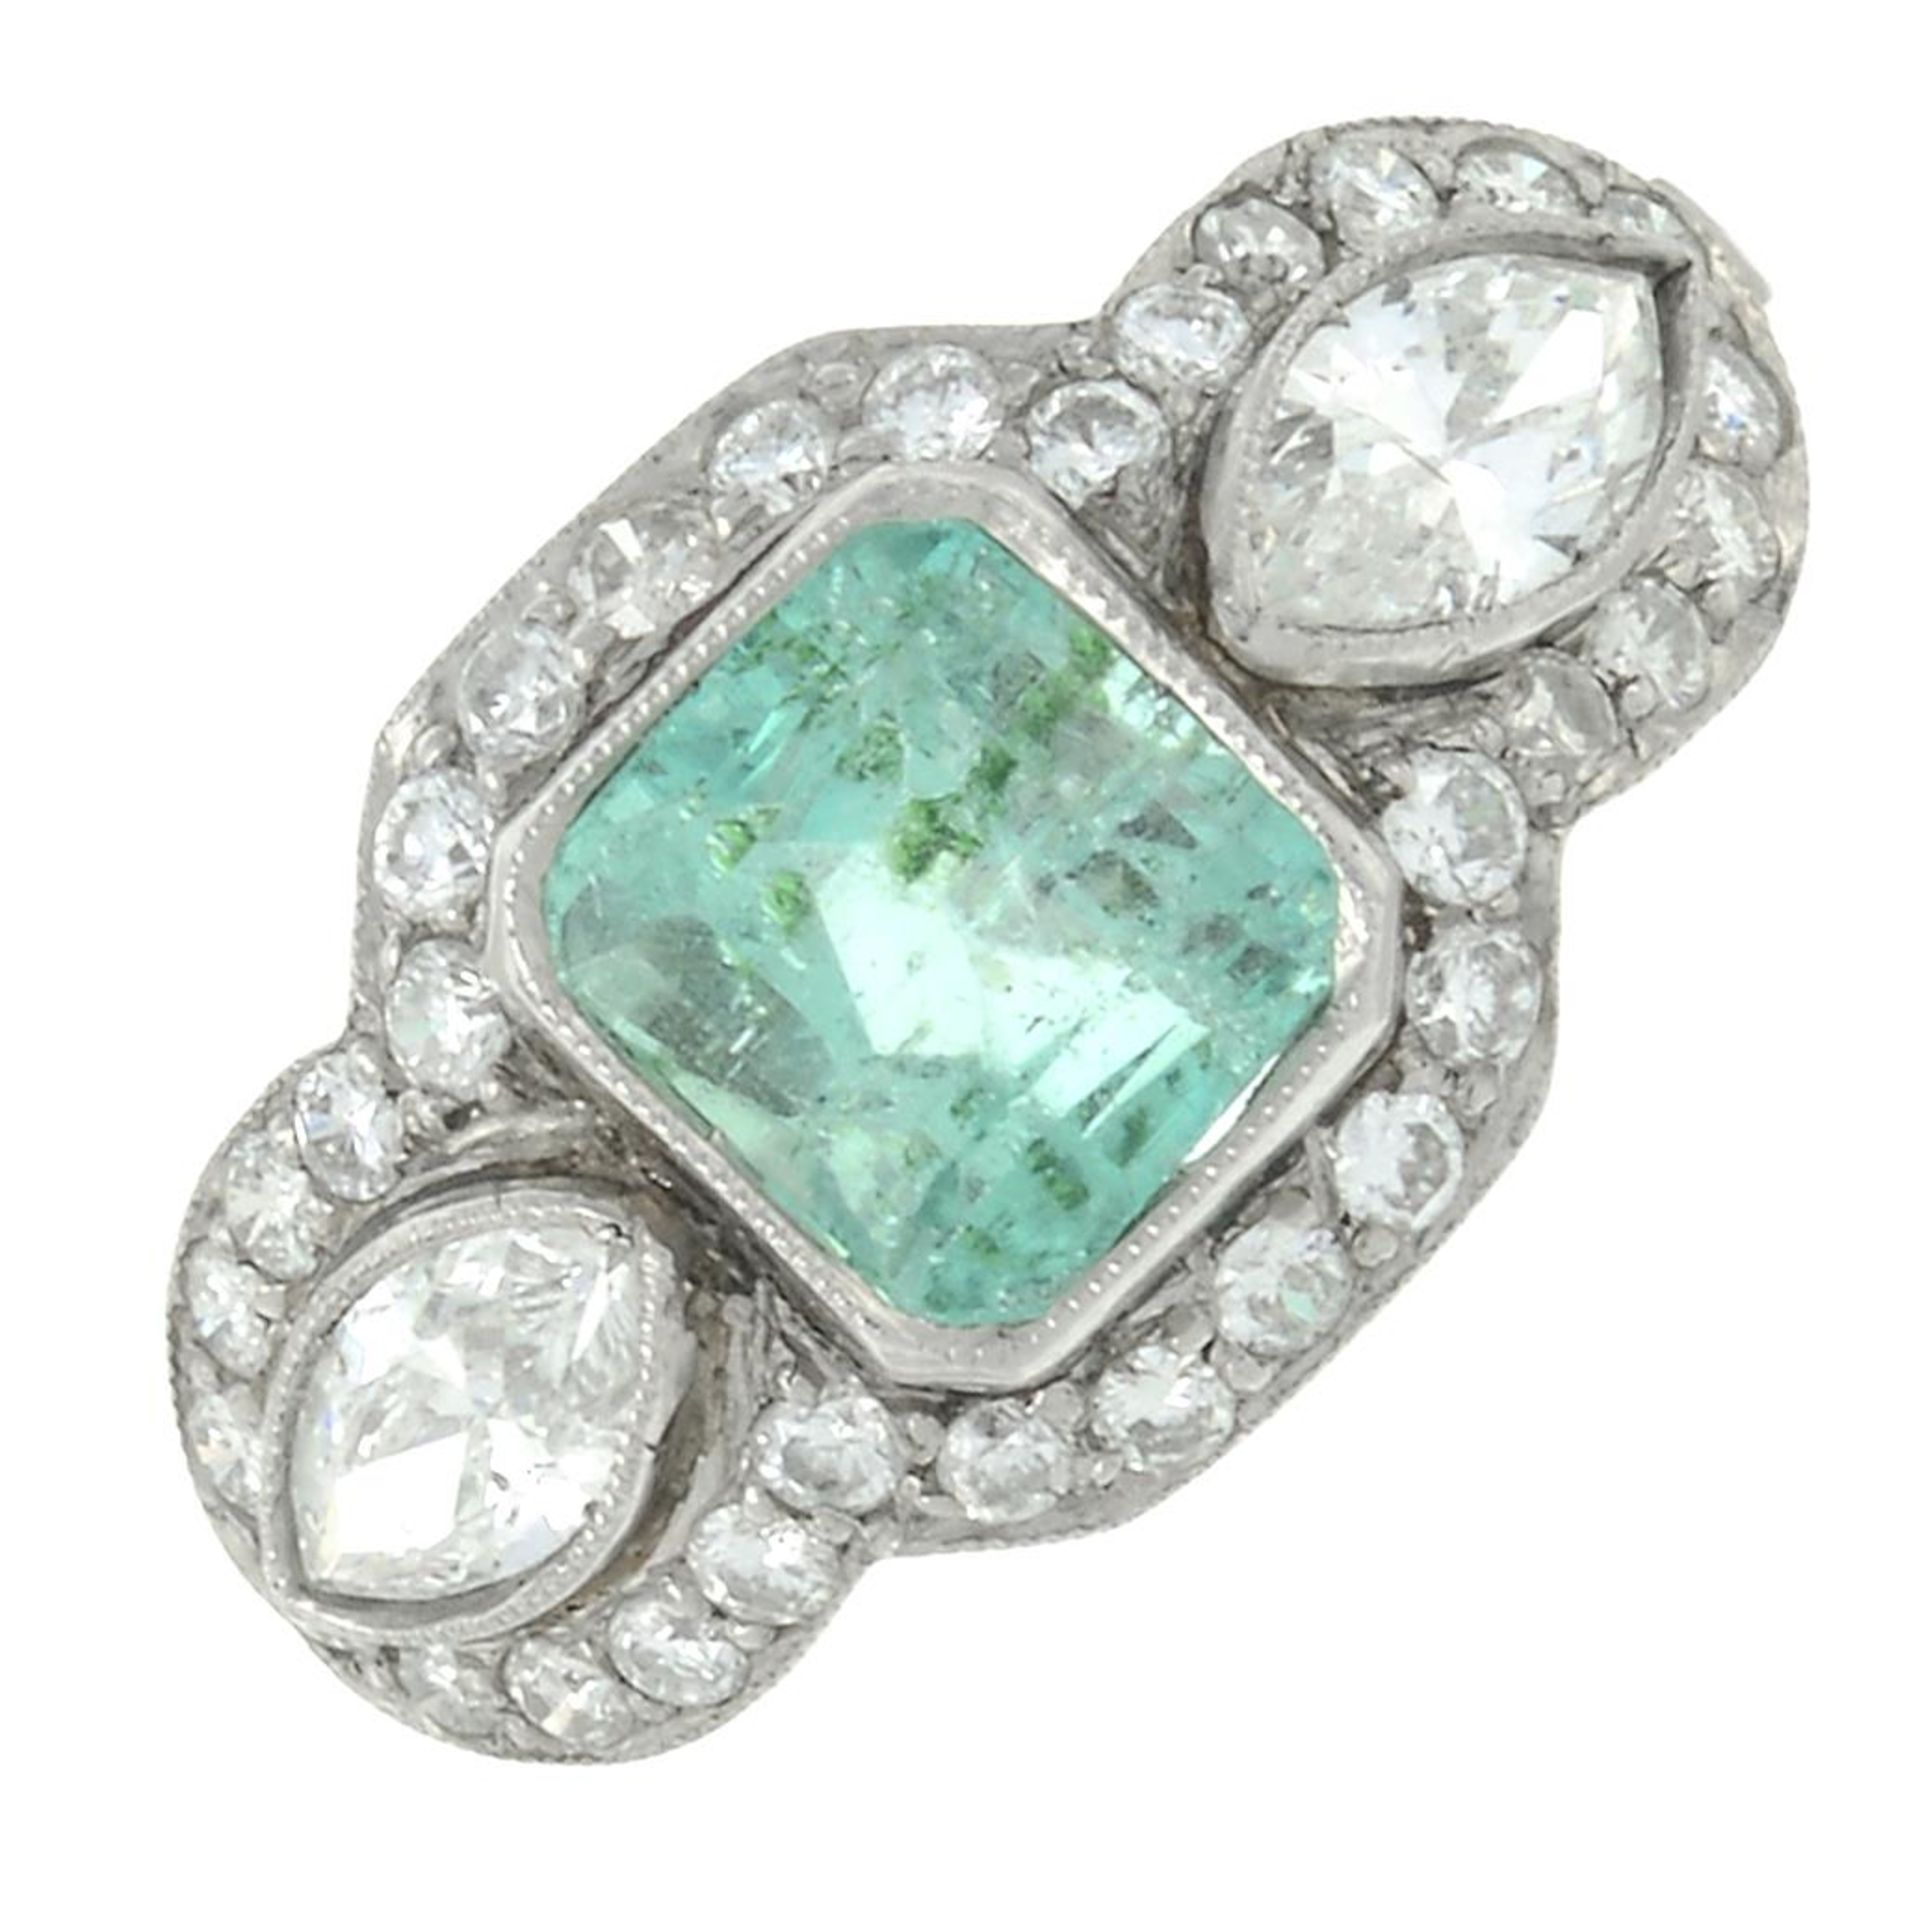 An emerald dress ring, with marquise-shape diamond sides, within a brilliant-cut diamond surround.